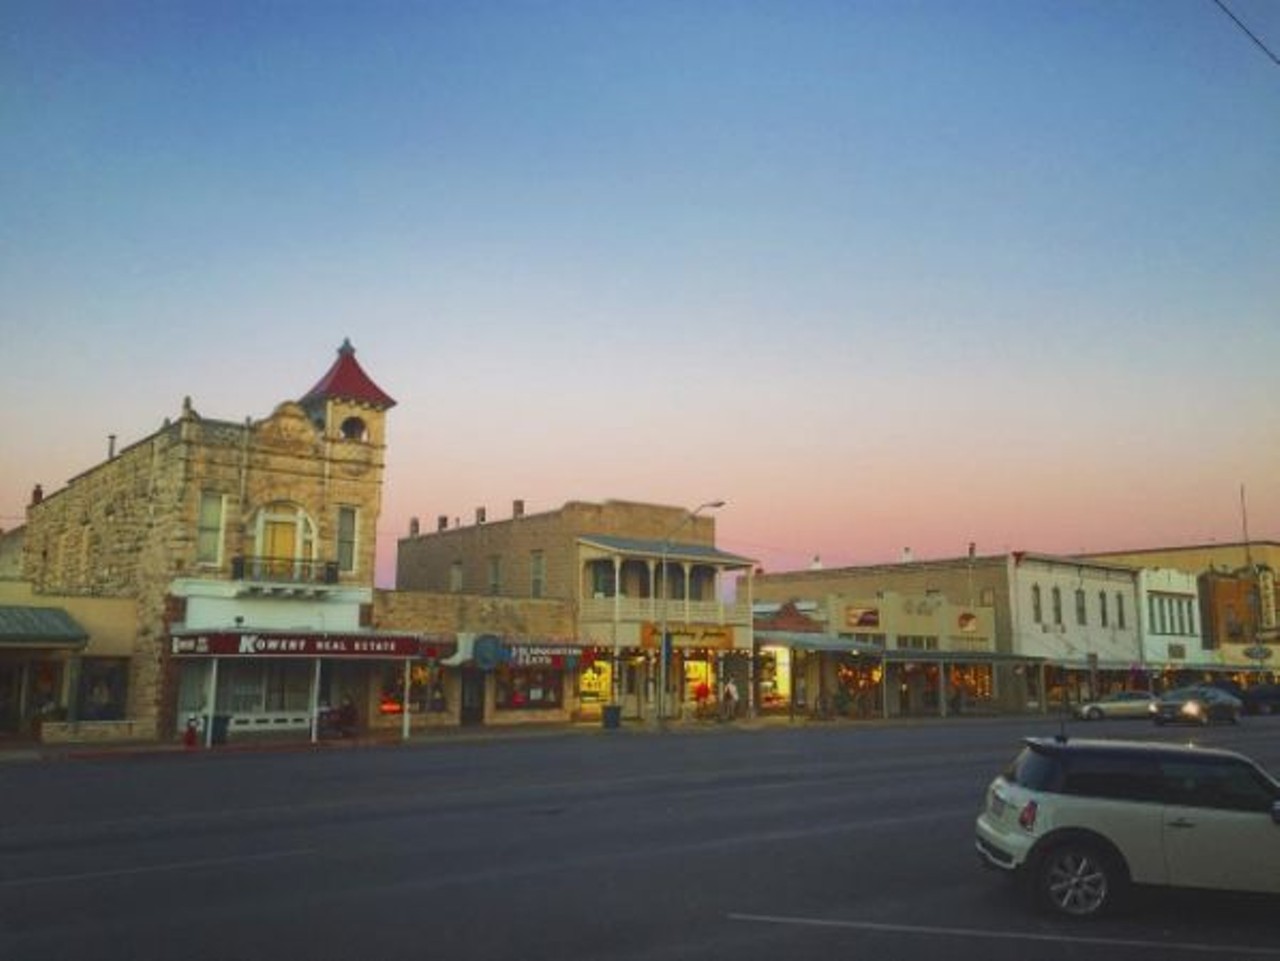 Spend the day in one of the small towns around SA
Take your pick between Hondo, Poteet, Floresville or Fredericksburg. Just kidding &#151;
&#151; there are plenty of towns to choose from.
Photo via Instagram, giannacalacool